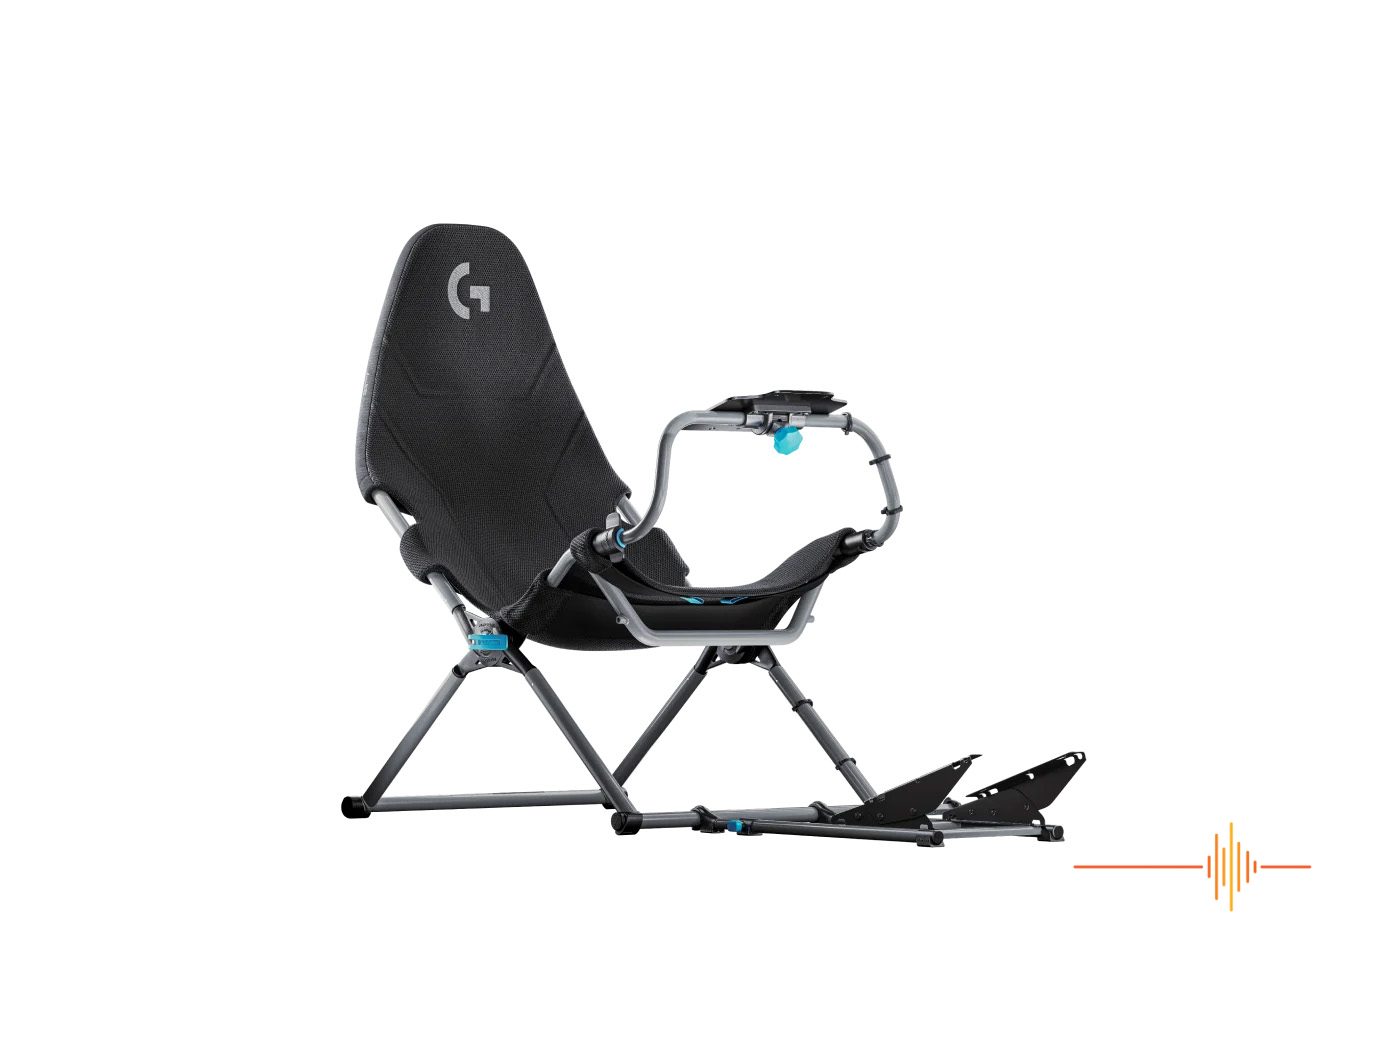 The Playseat Challenge - A 2020 Review! 